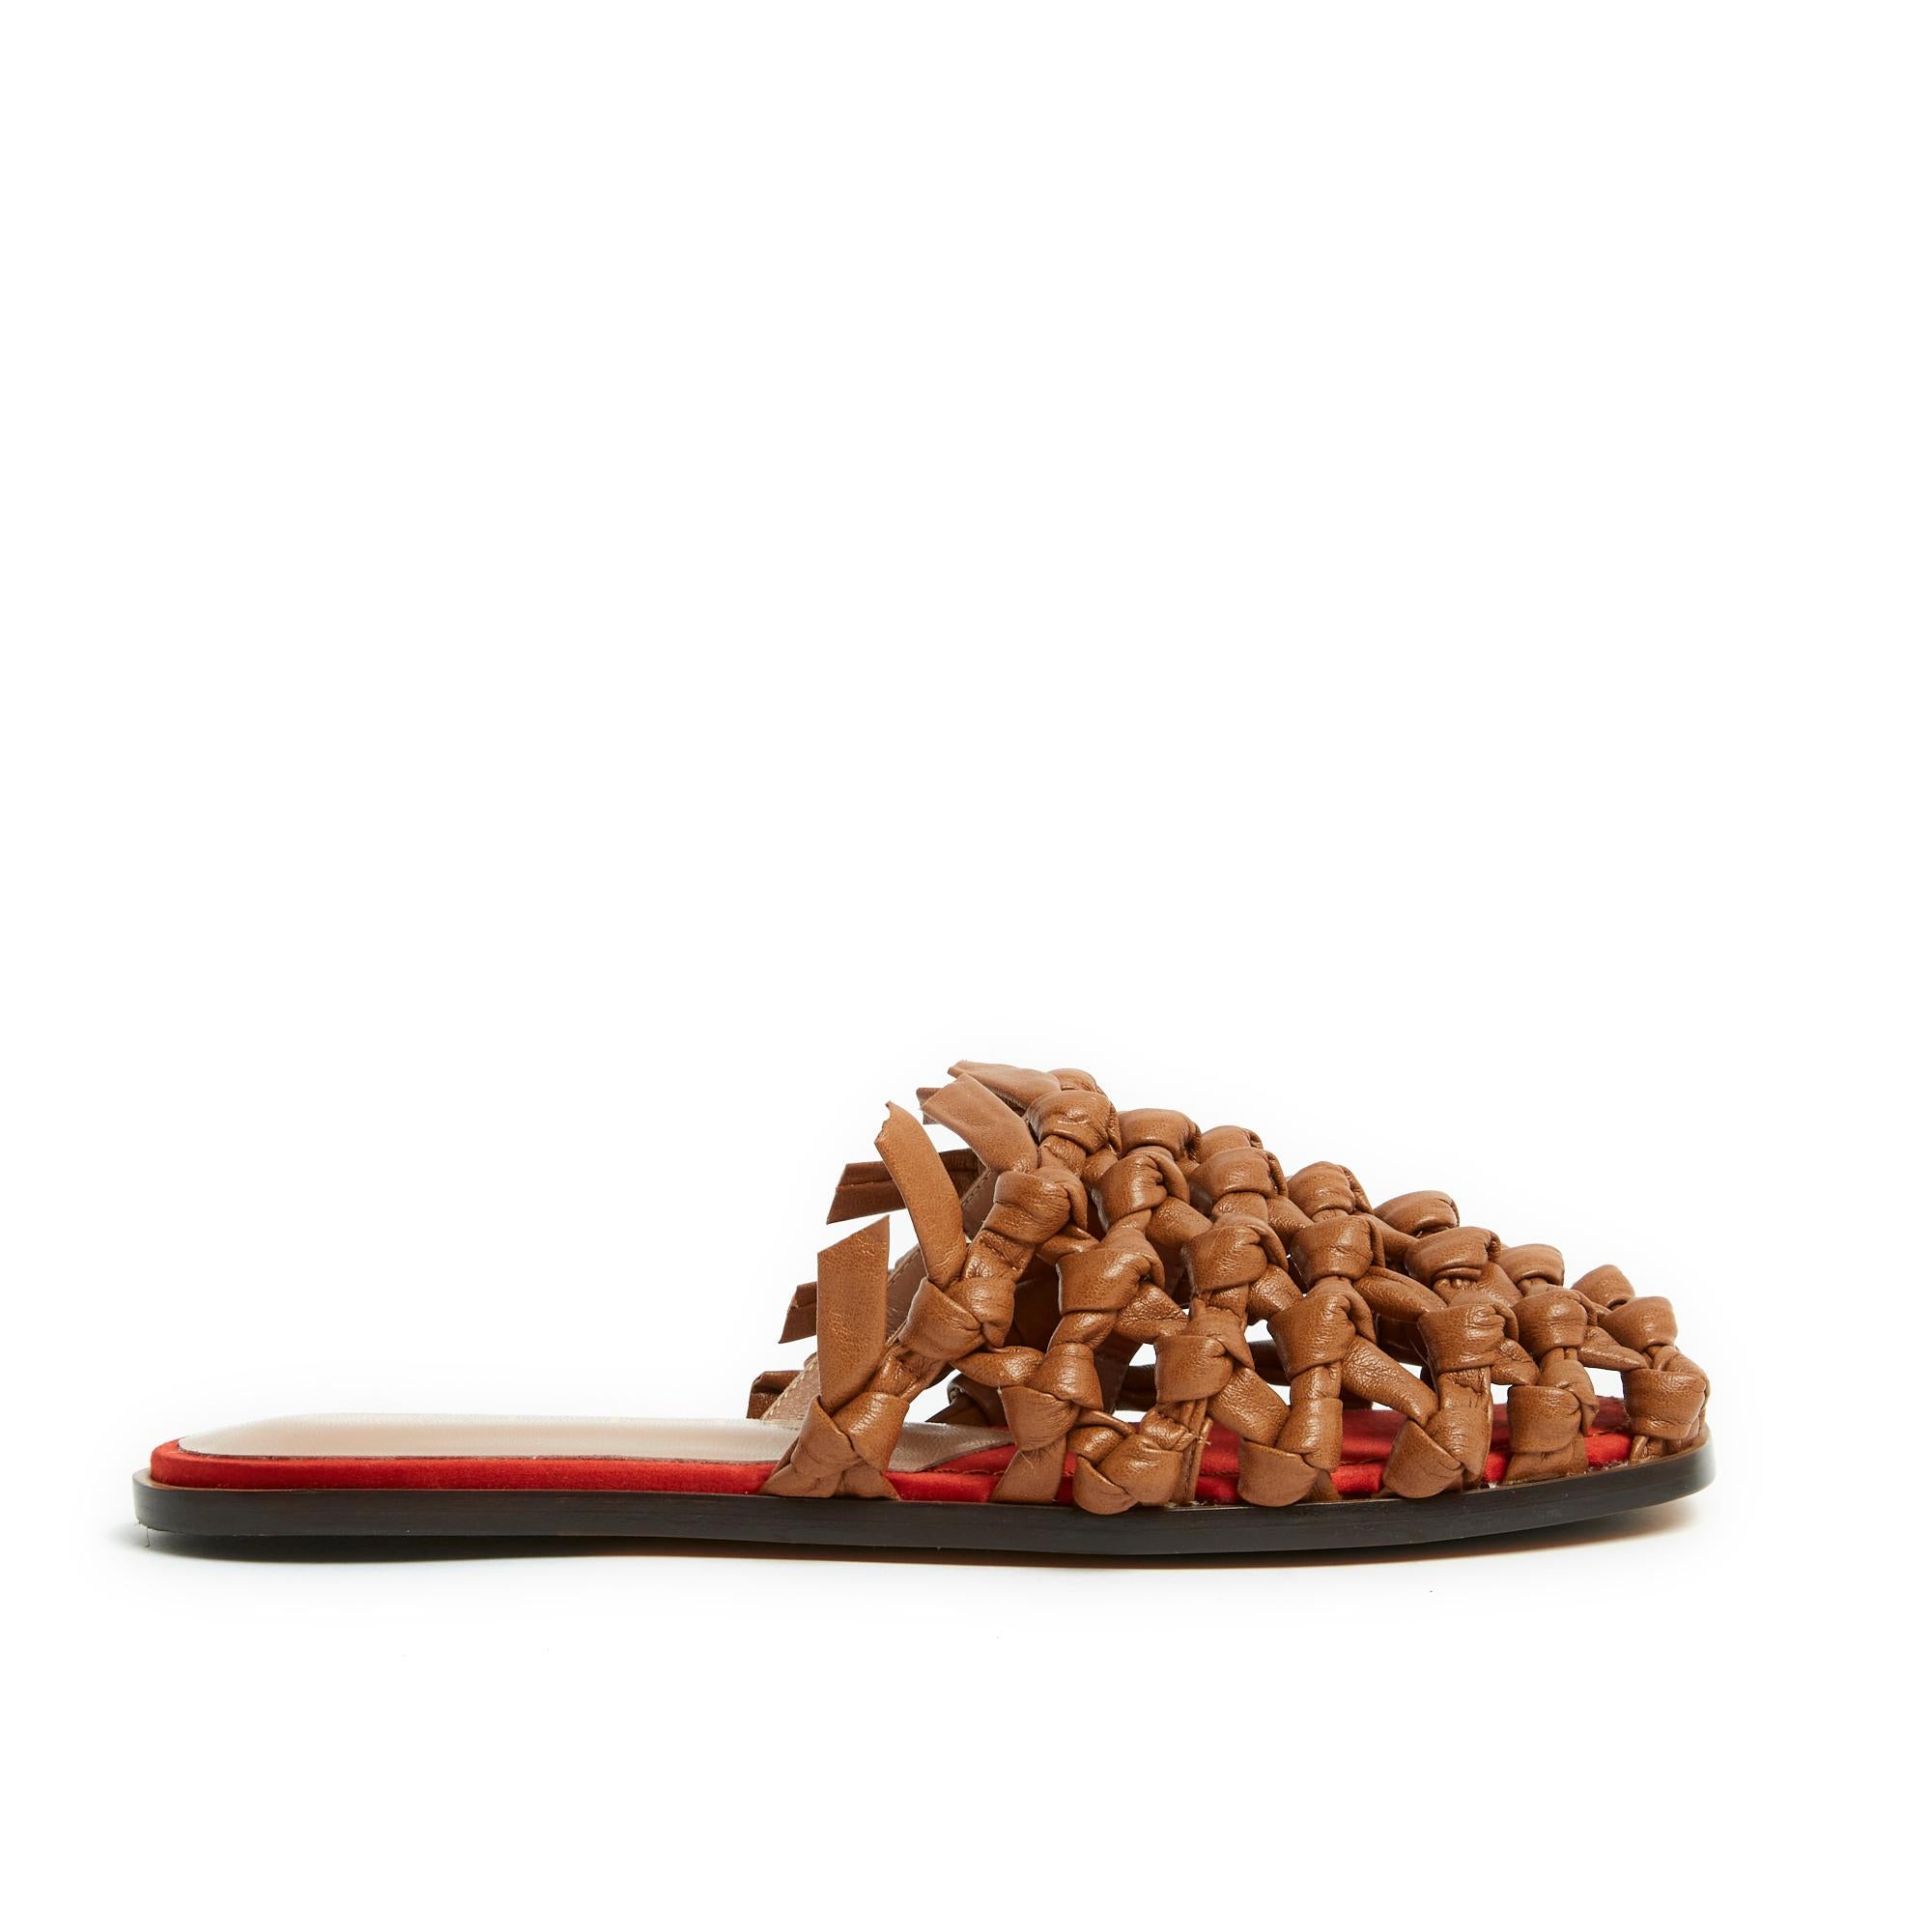 Etro mules in camel-colored woven leather, slightly square beveled toe, red and camel insole, leather and rubber outsole. Size EU38.5. The shoes are new, delivered in an Etro dustbag, great look.